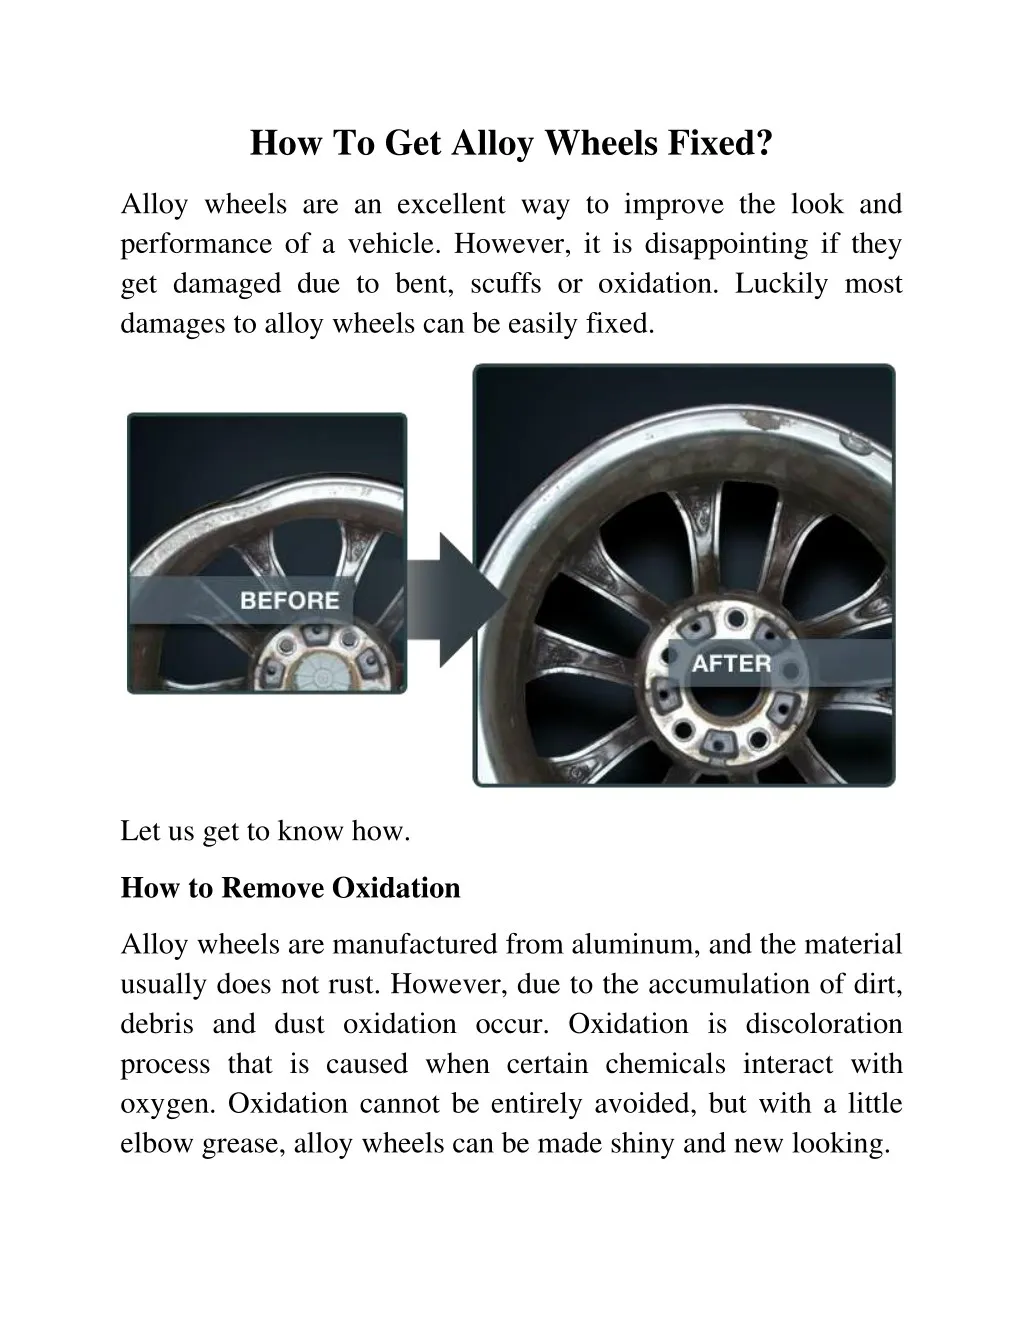 how to get alloy wheels fixed